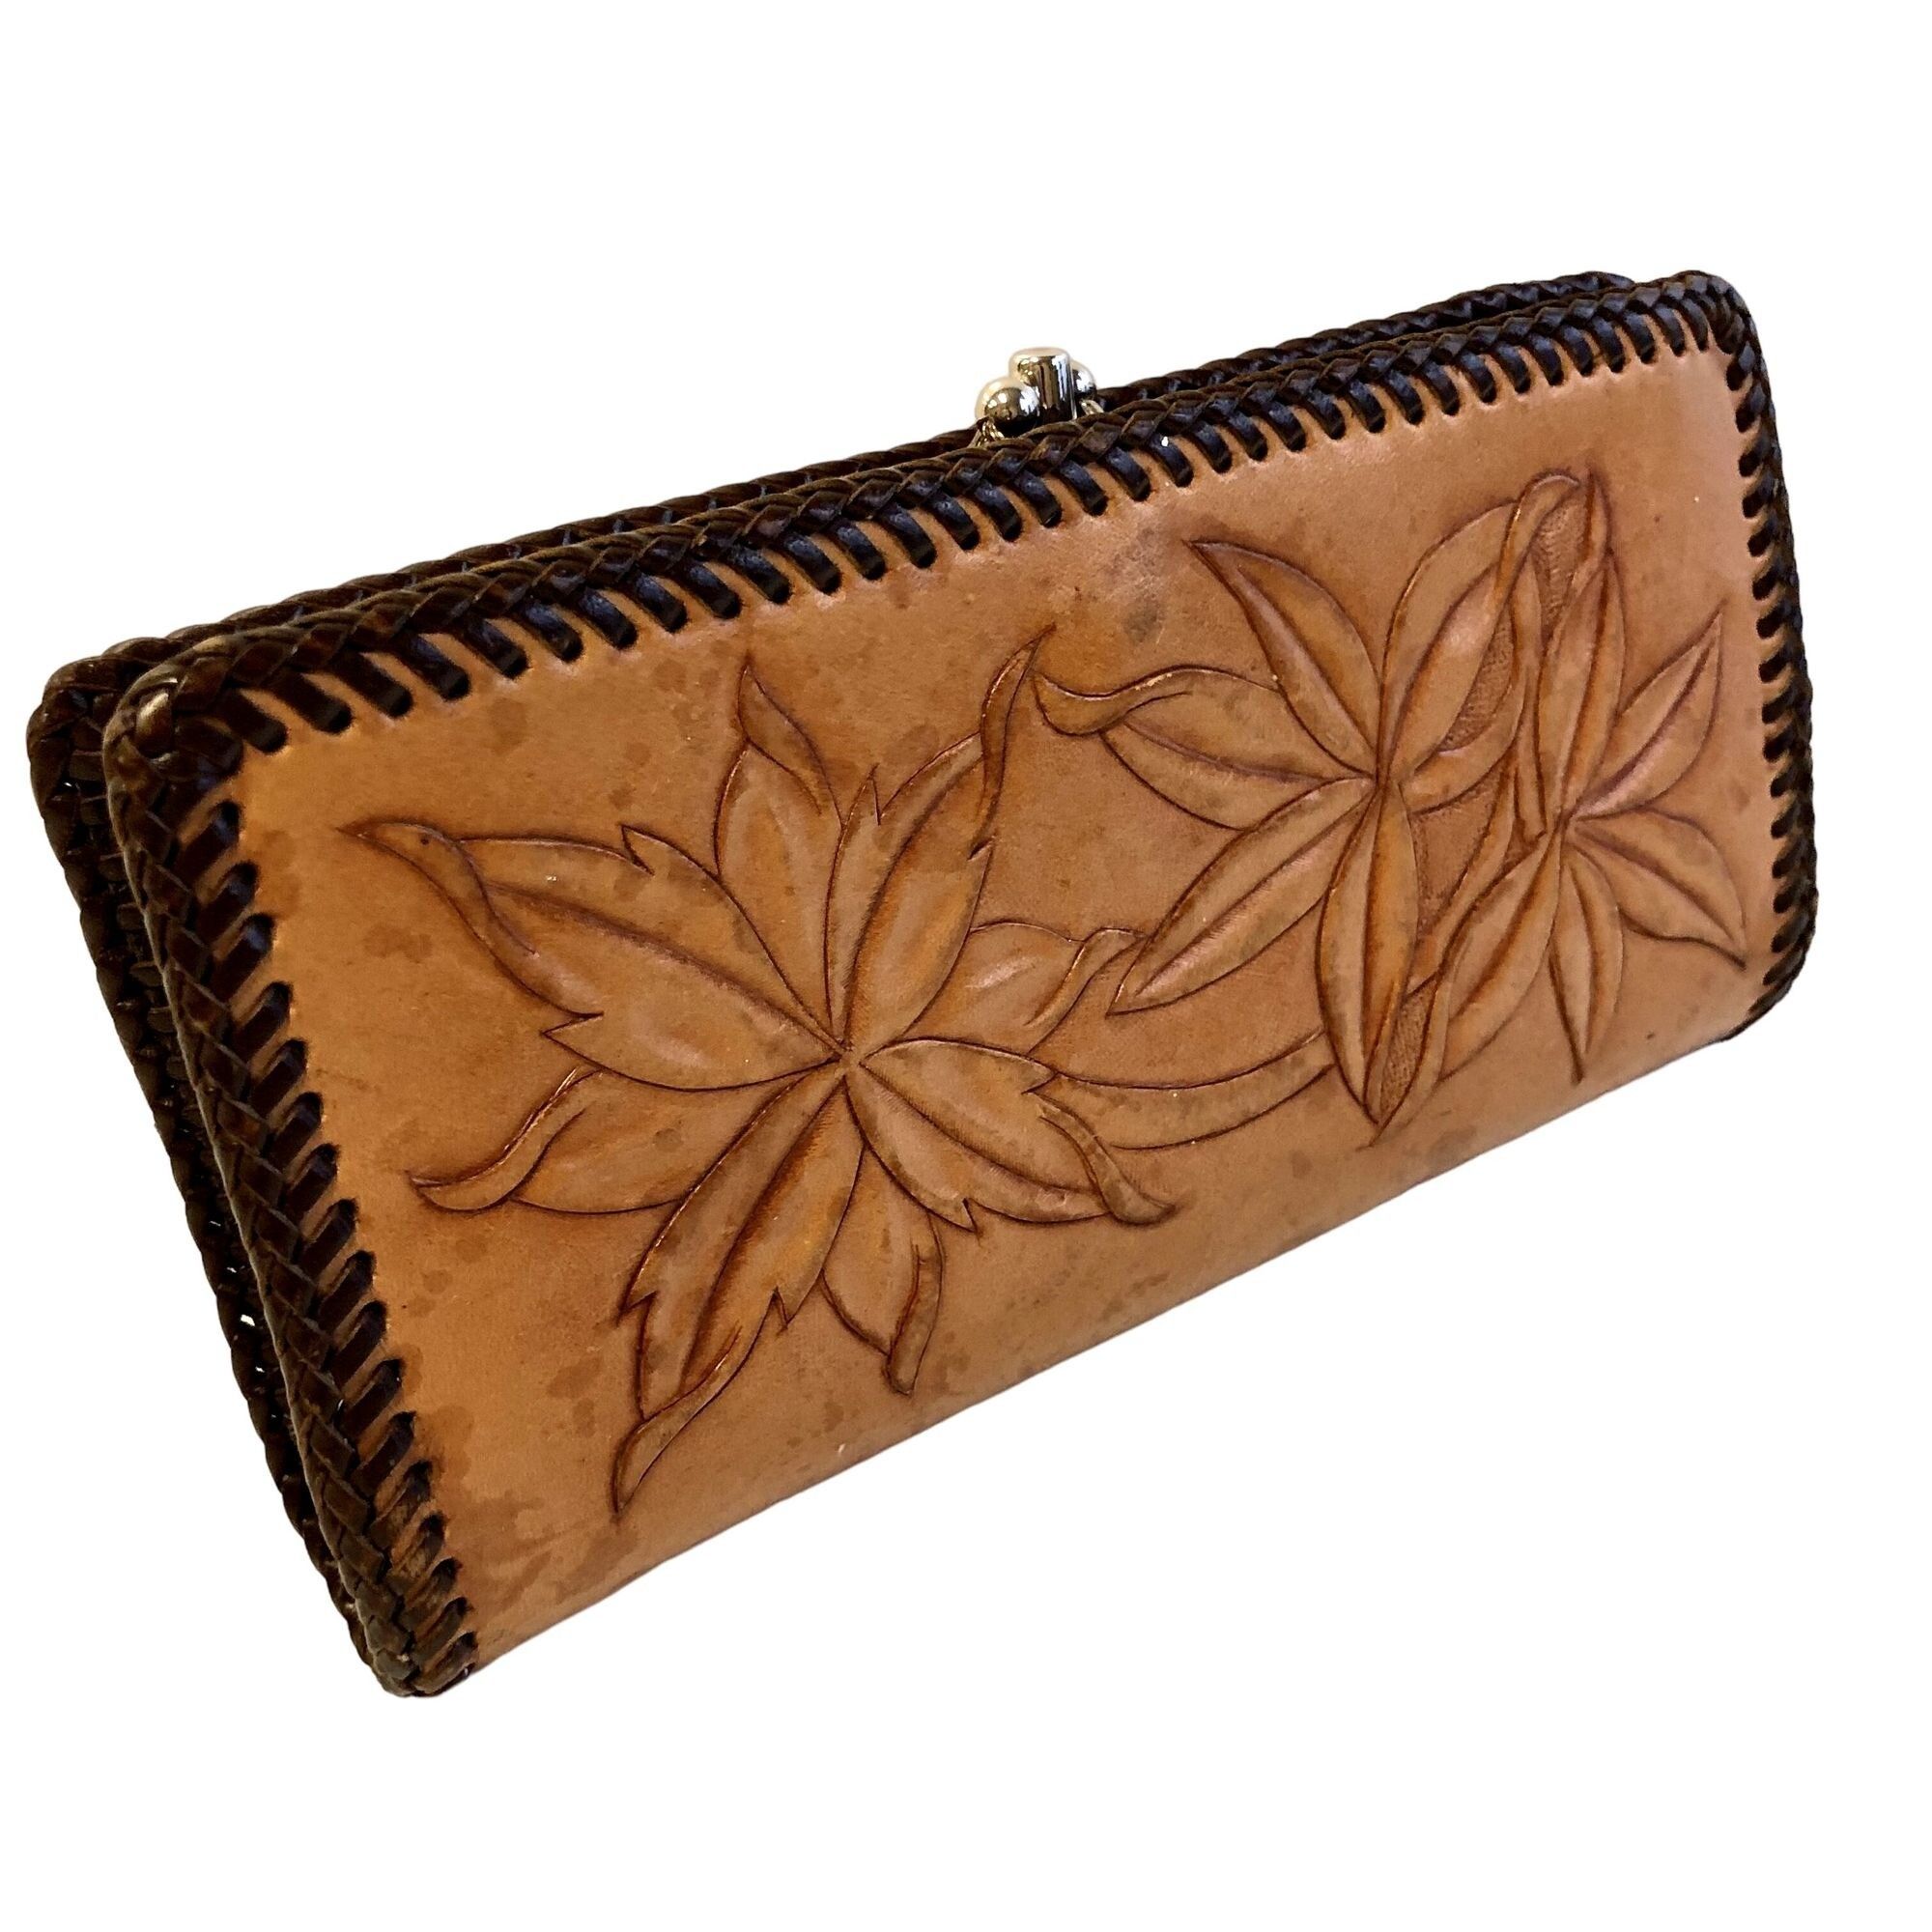 Unkwn 70s HANDMADE Tooled FLORAL Leather LACED Wallet Clutch Purse Size ONE SIZE - 1 Preview